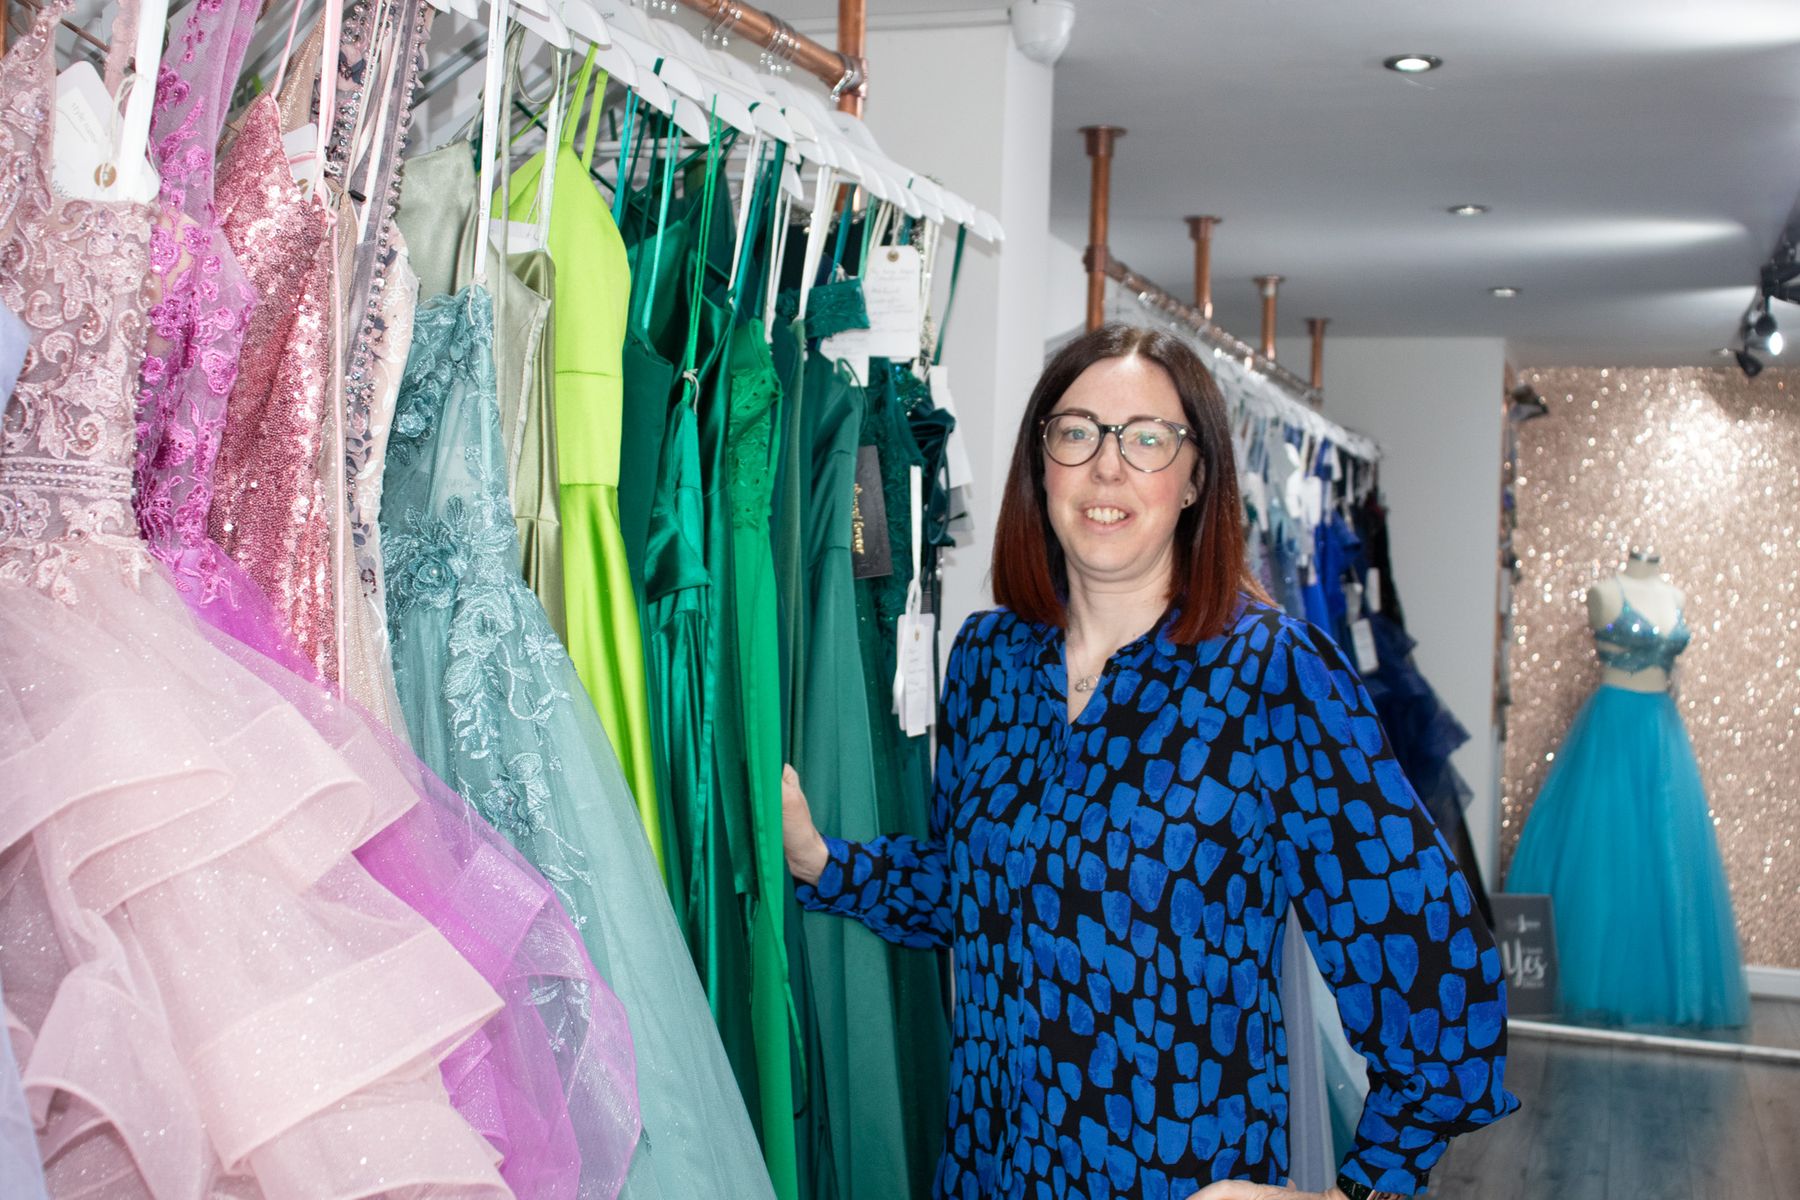 A lady with dark brown hair and glasses is stood next to a rail of different coloured sparkly prom dresses